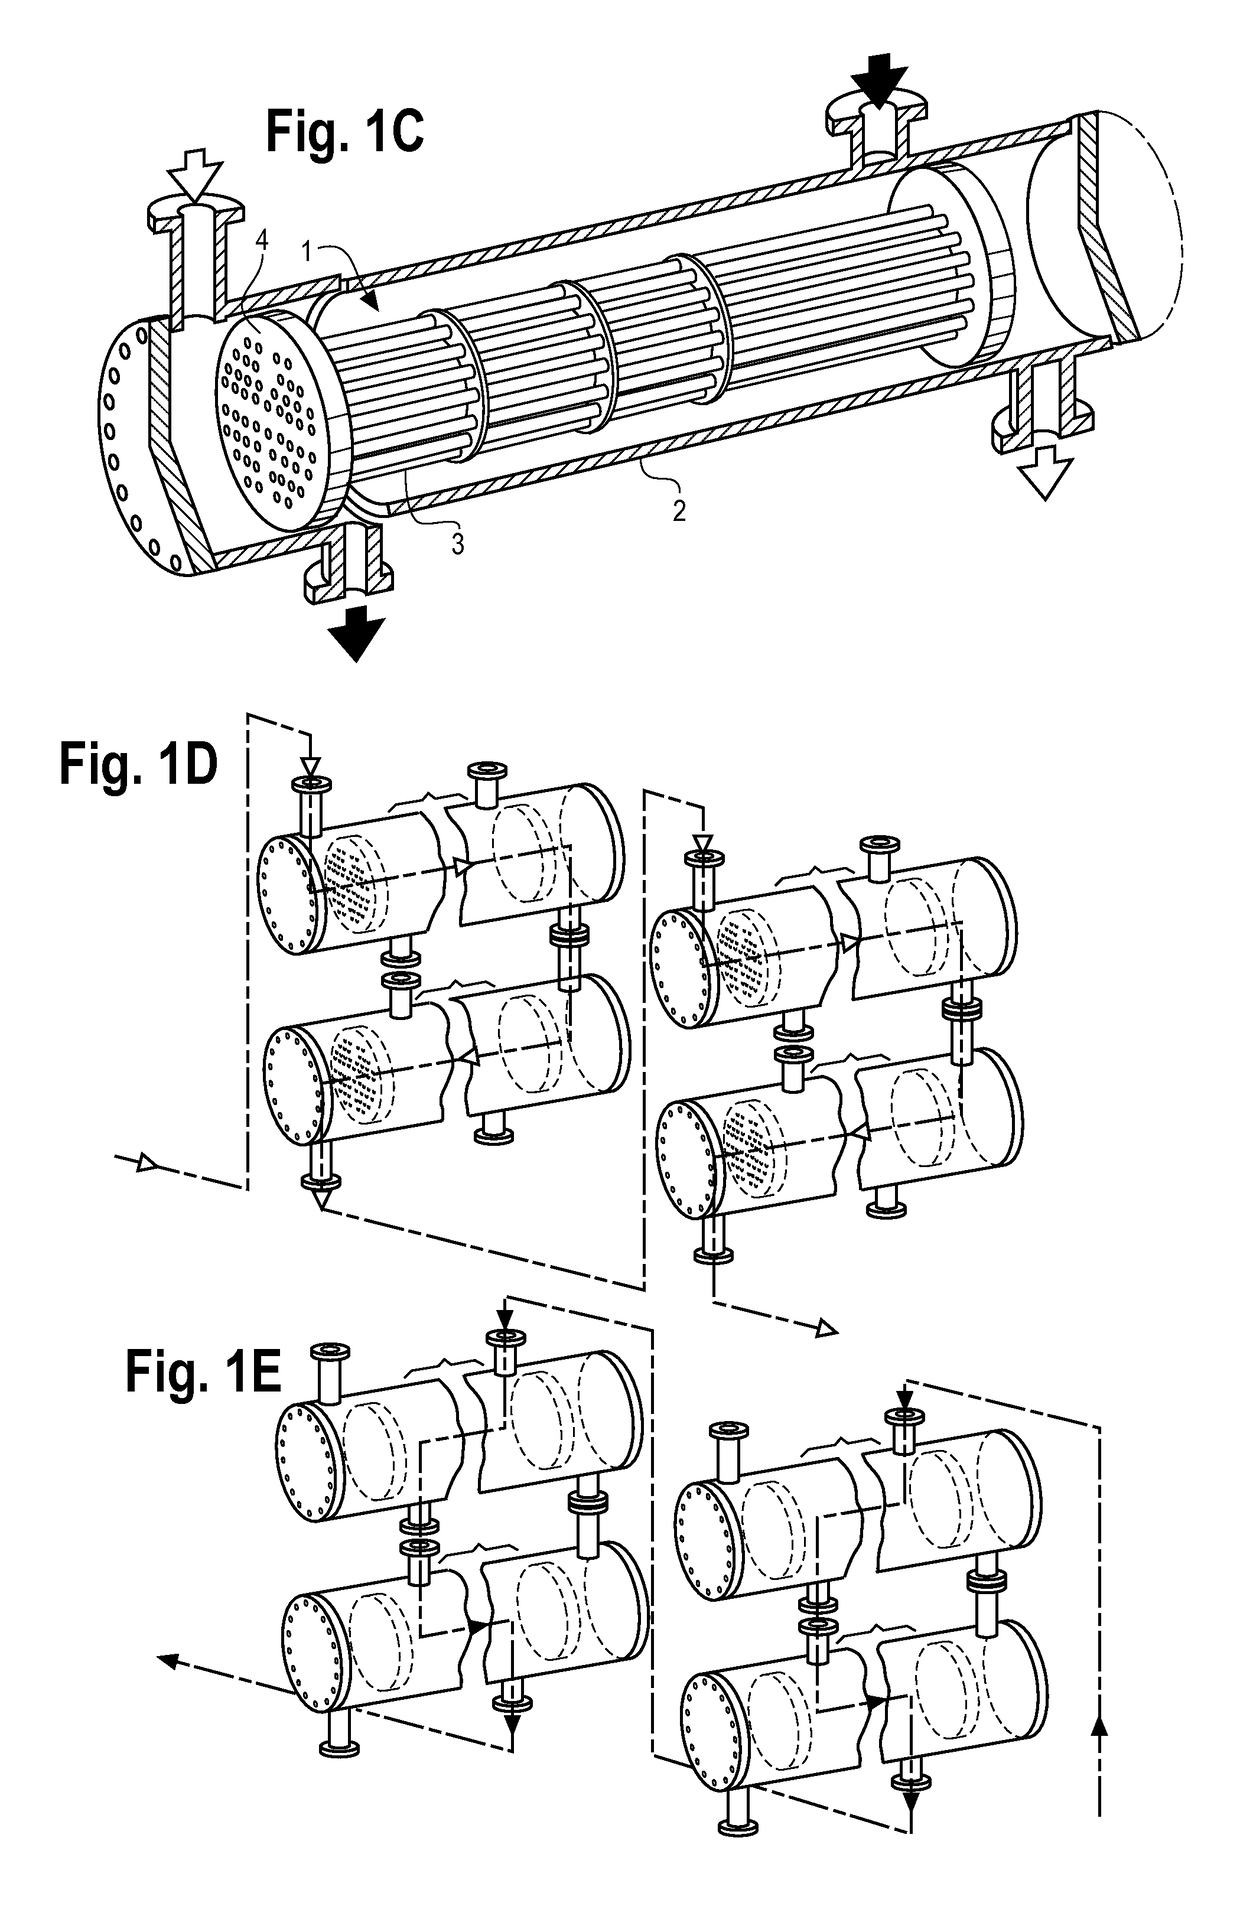 Method and system for the in-situ removal of carbonaceous deposits from heat exchanger tube bundles